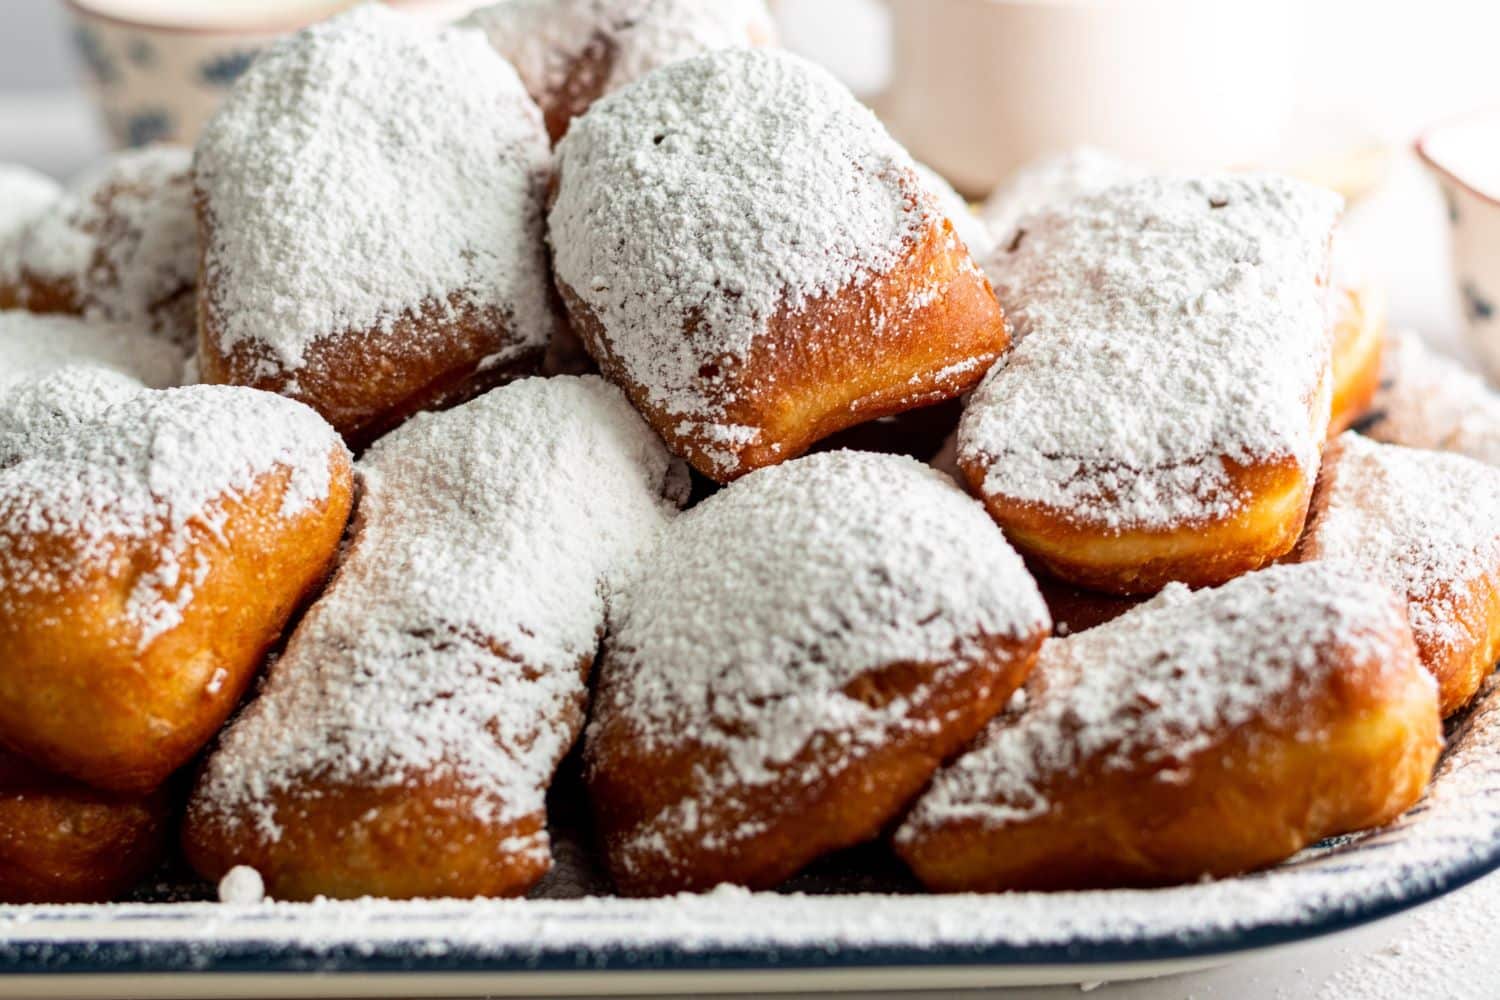 brunch recipes to try, homemade beignets